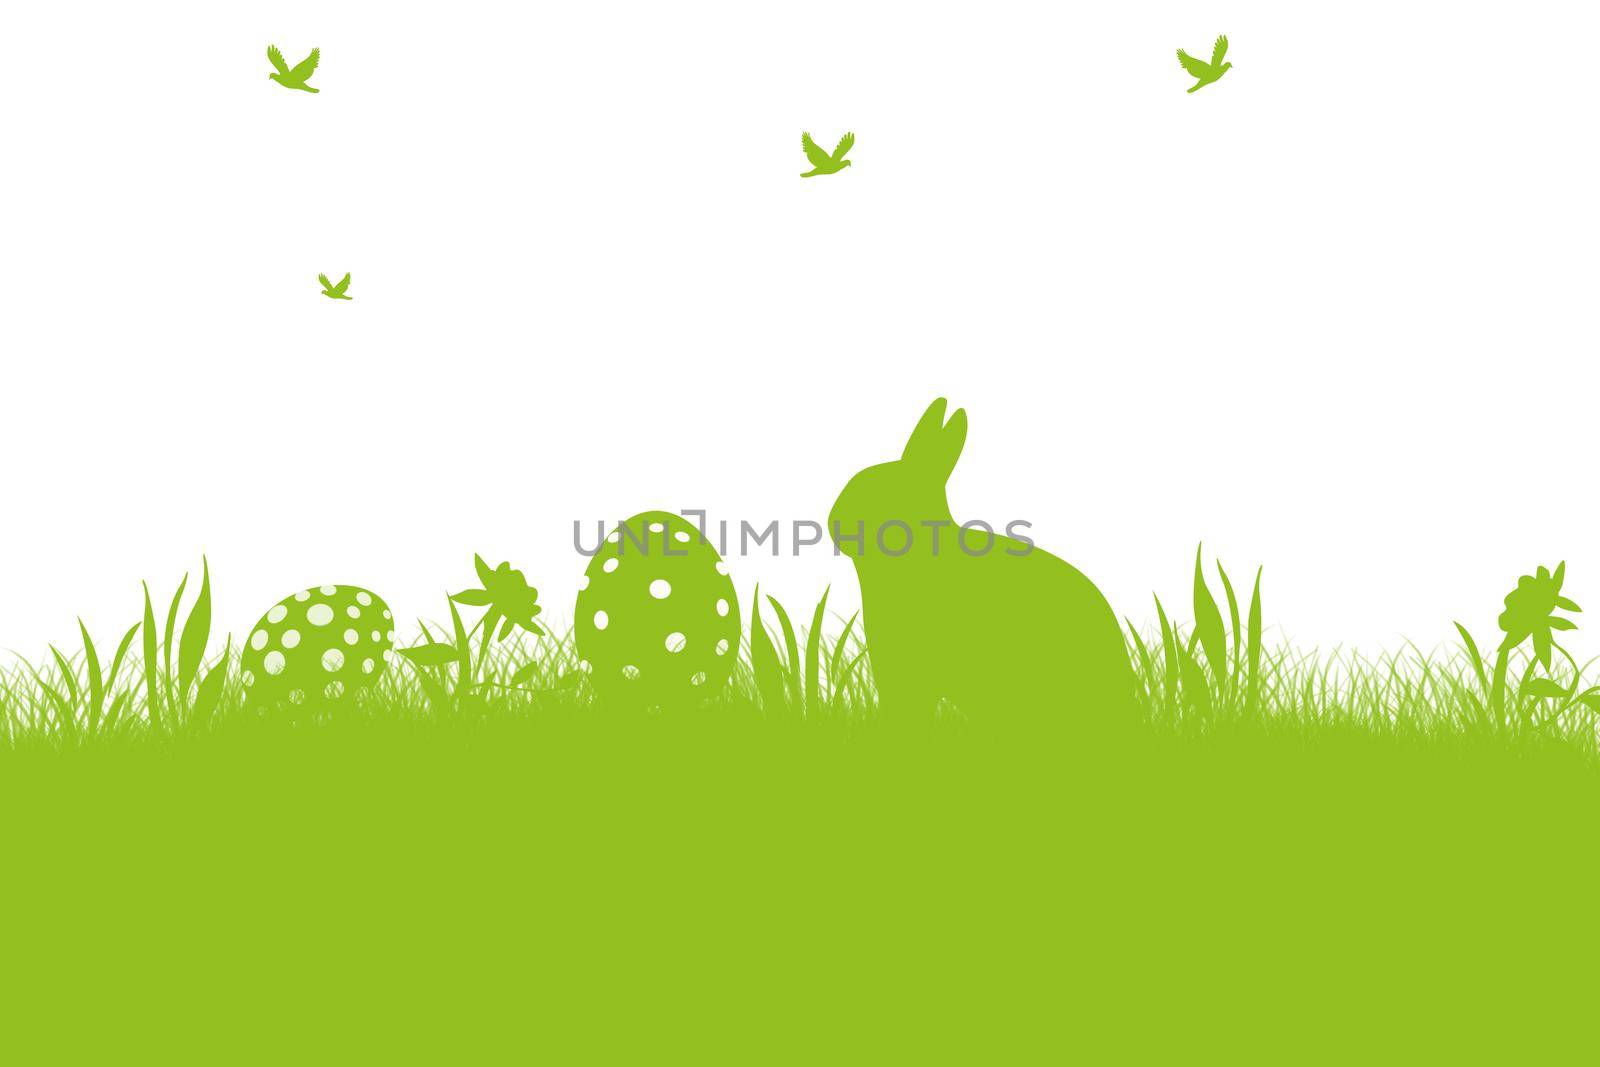 Beautiful Easter background with colorful Easter eggs by Taut